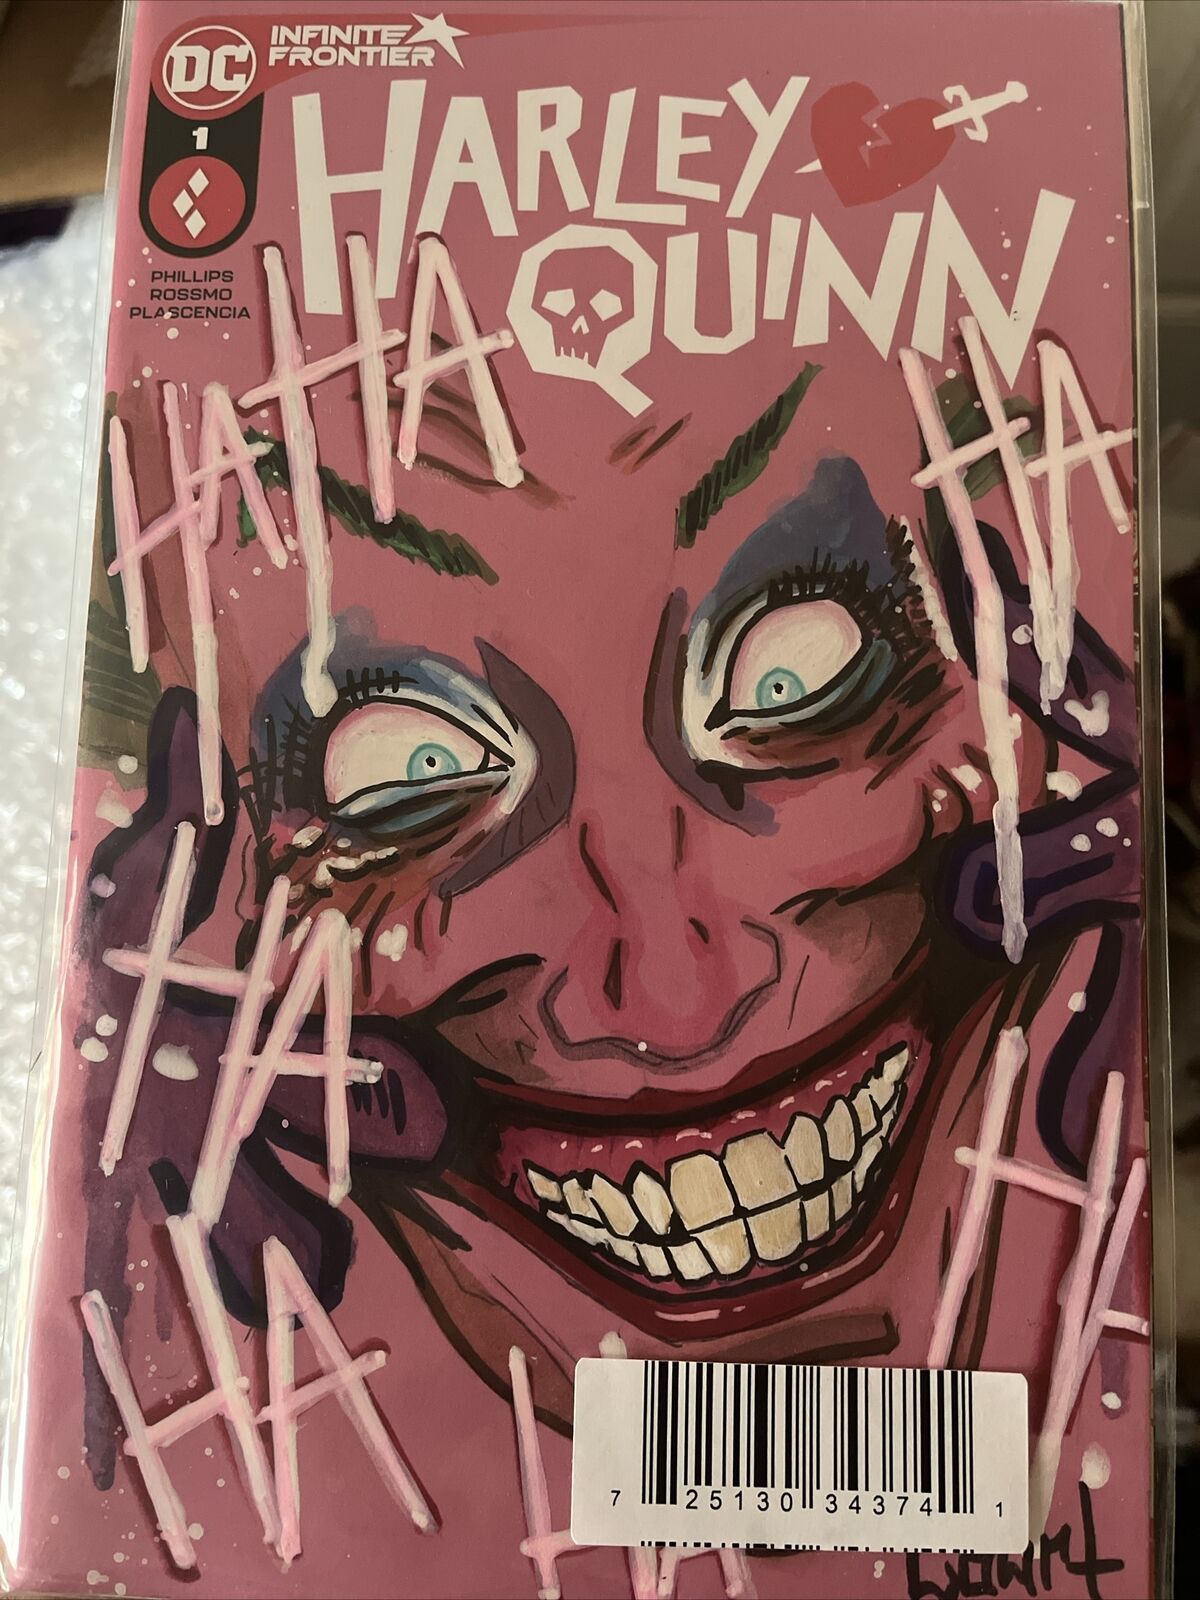 INFINITE FRONTIER #1 Harley Quinn Signed And Remarked Jessica Court Original Art